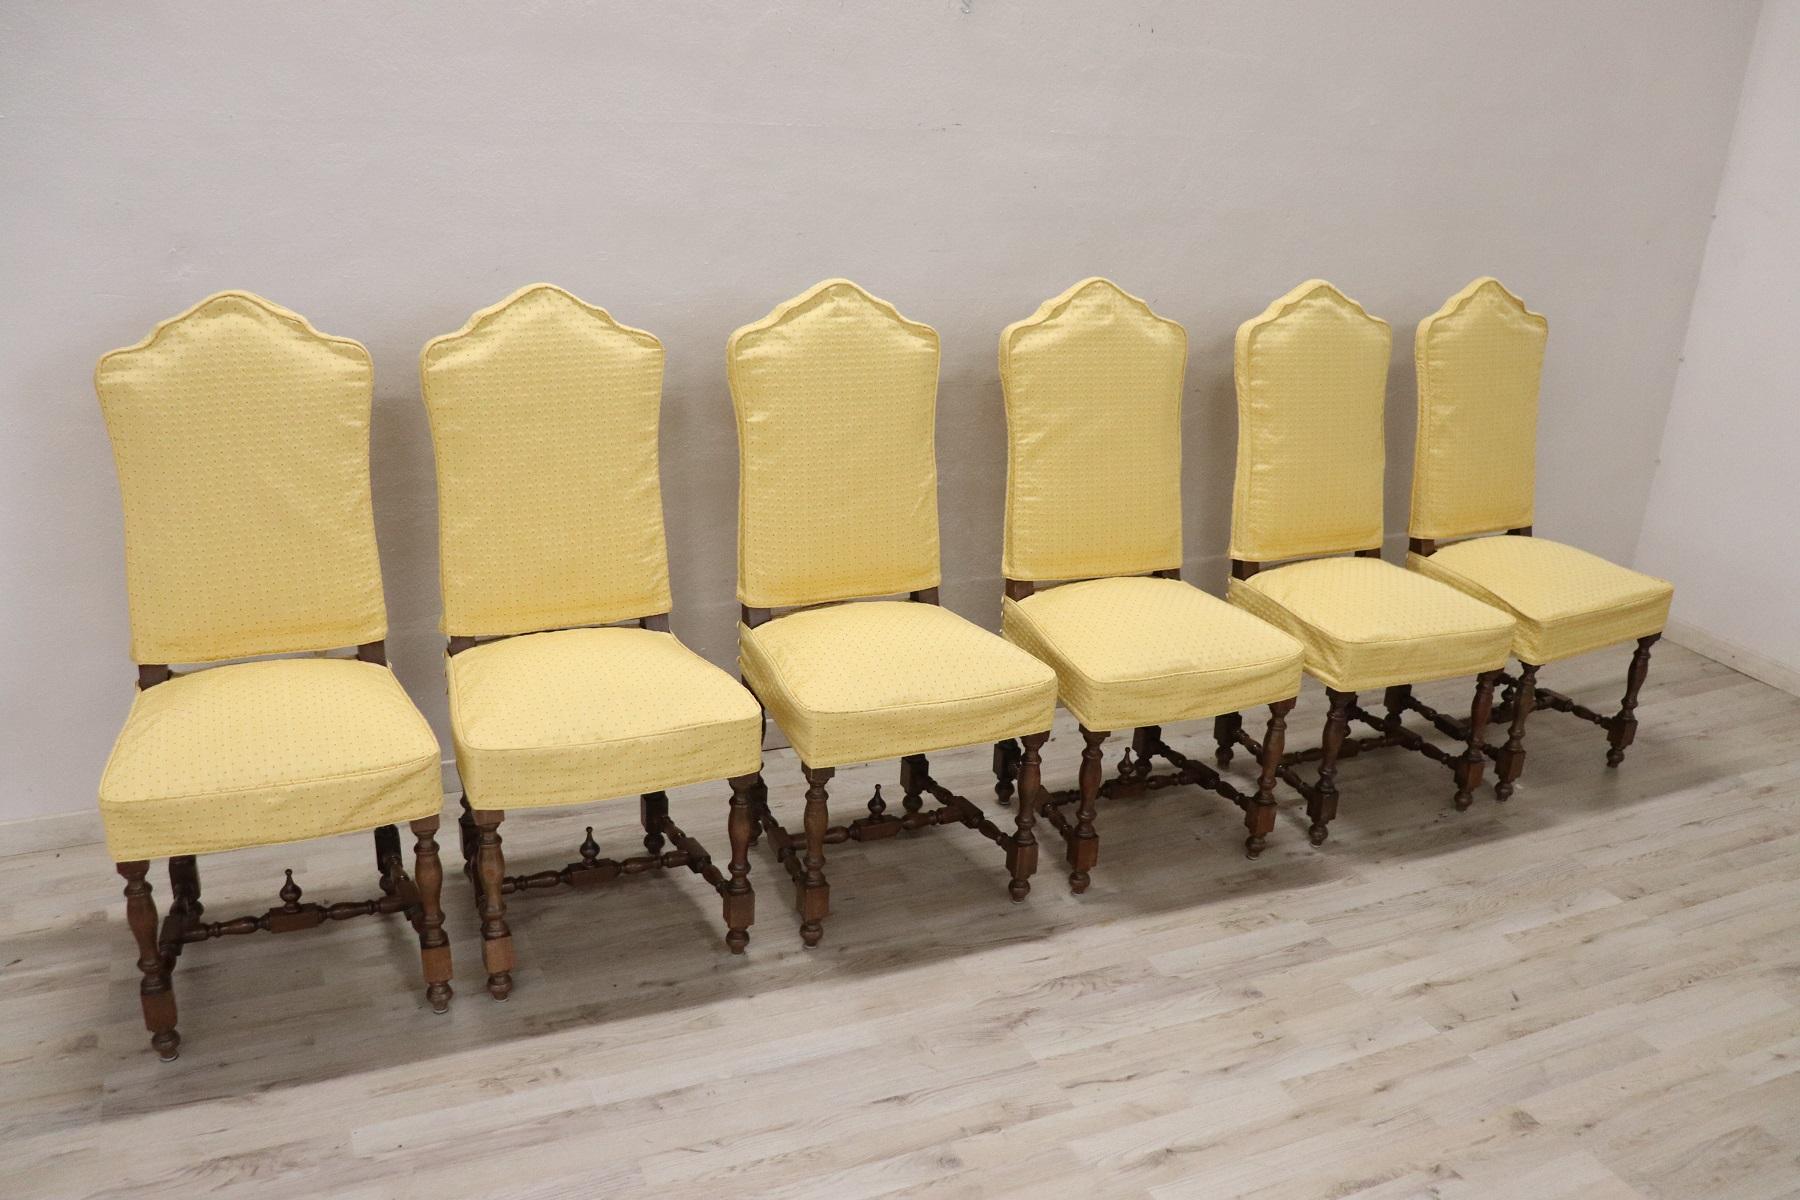 Series of six refined mid-20th century Italian Louis XIV style walnut wood chairs. The legs with turned decorations. Each chair has a protective yellow fabric that can be removed for washing. Perfect for a dining table. Beautiful chairs ready to be